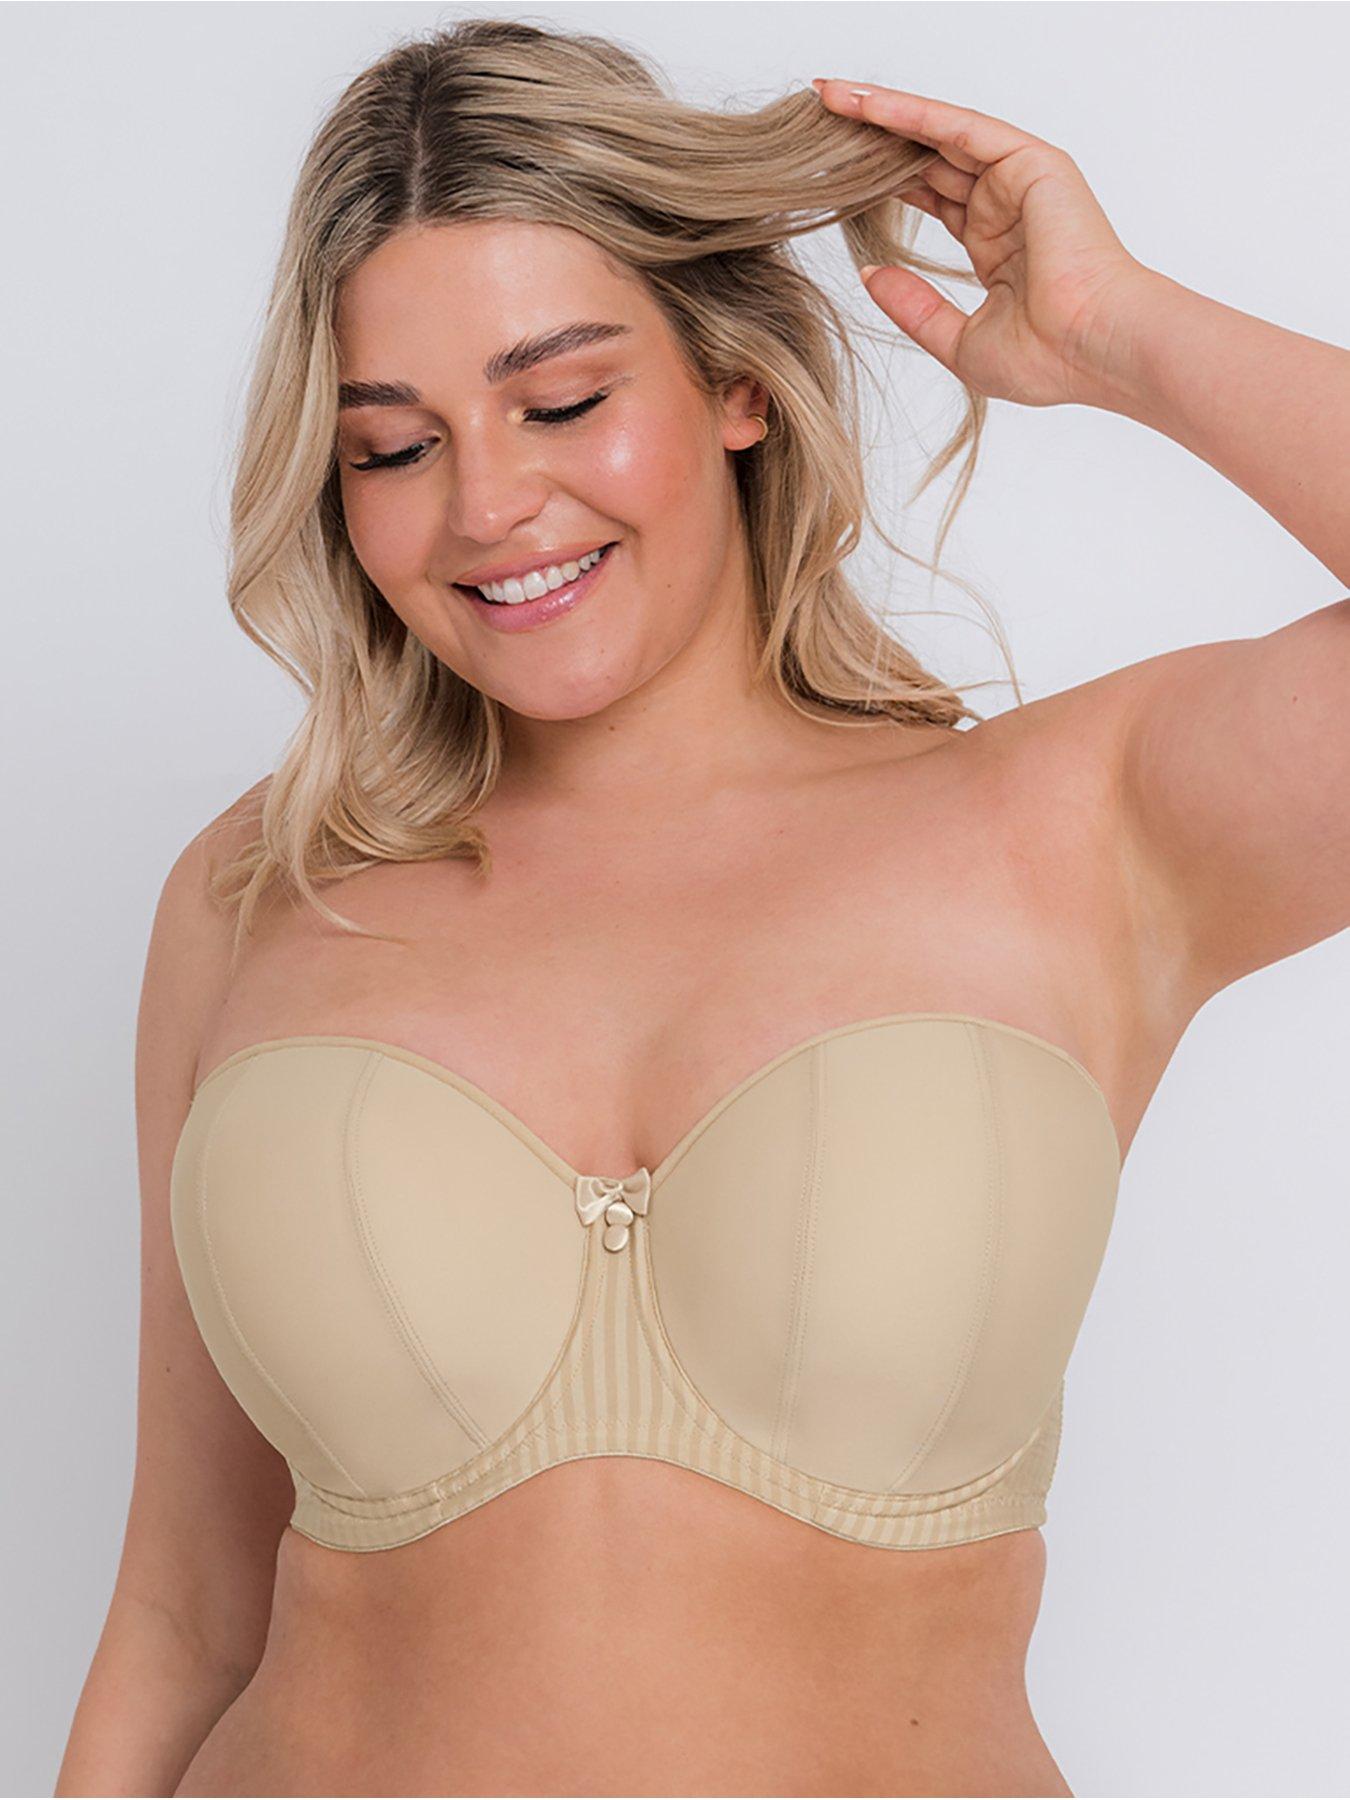 Busty Curvy WOMEN in BRAS 1-Page Catalog Clipping - CATHERINES